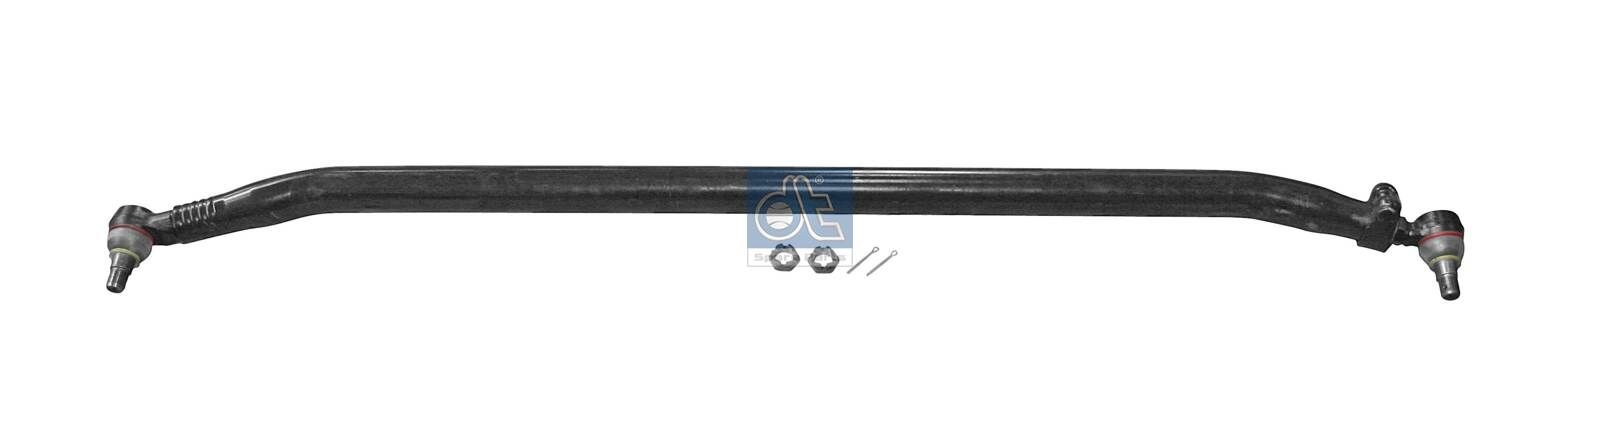 DT Spare Parts 6.53021 Rod Assembly 20824578